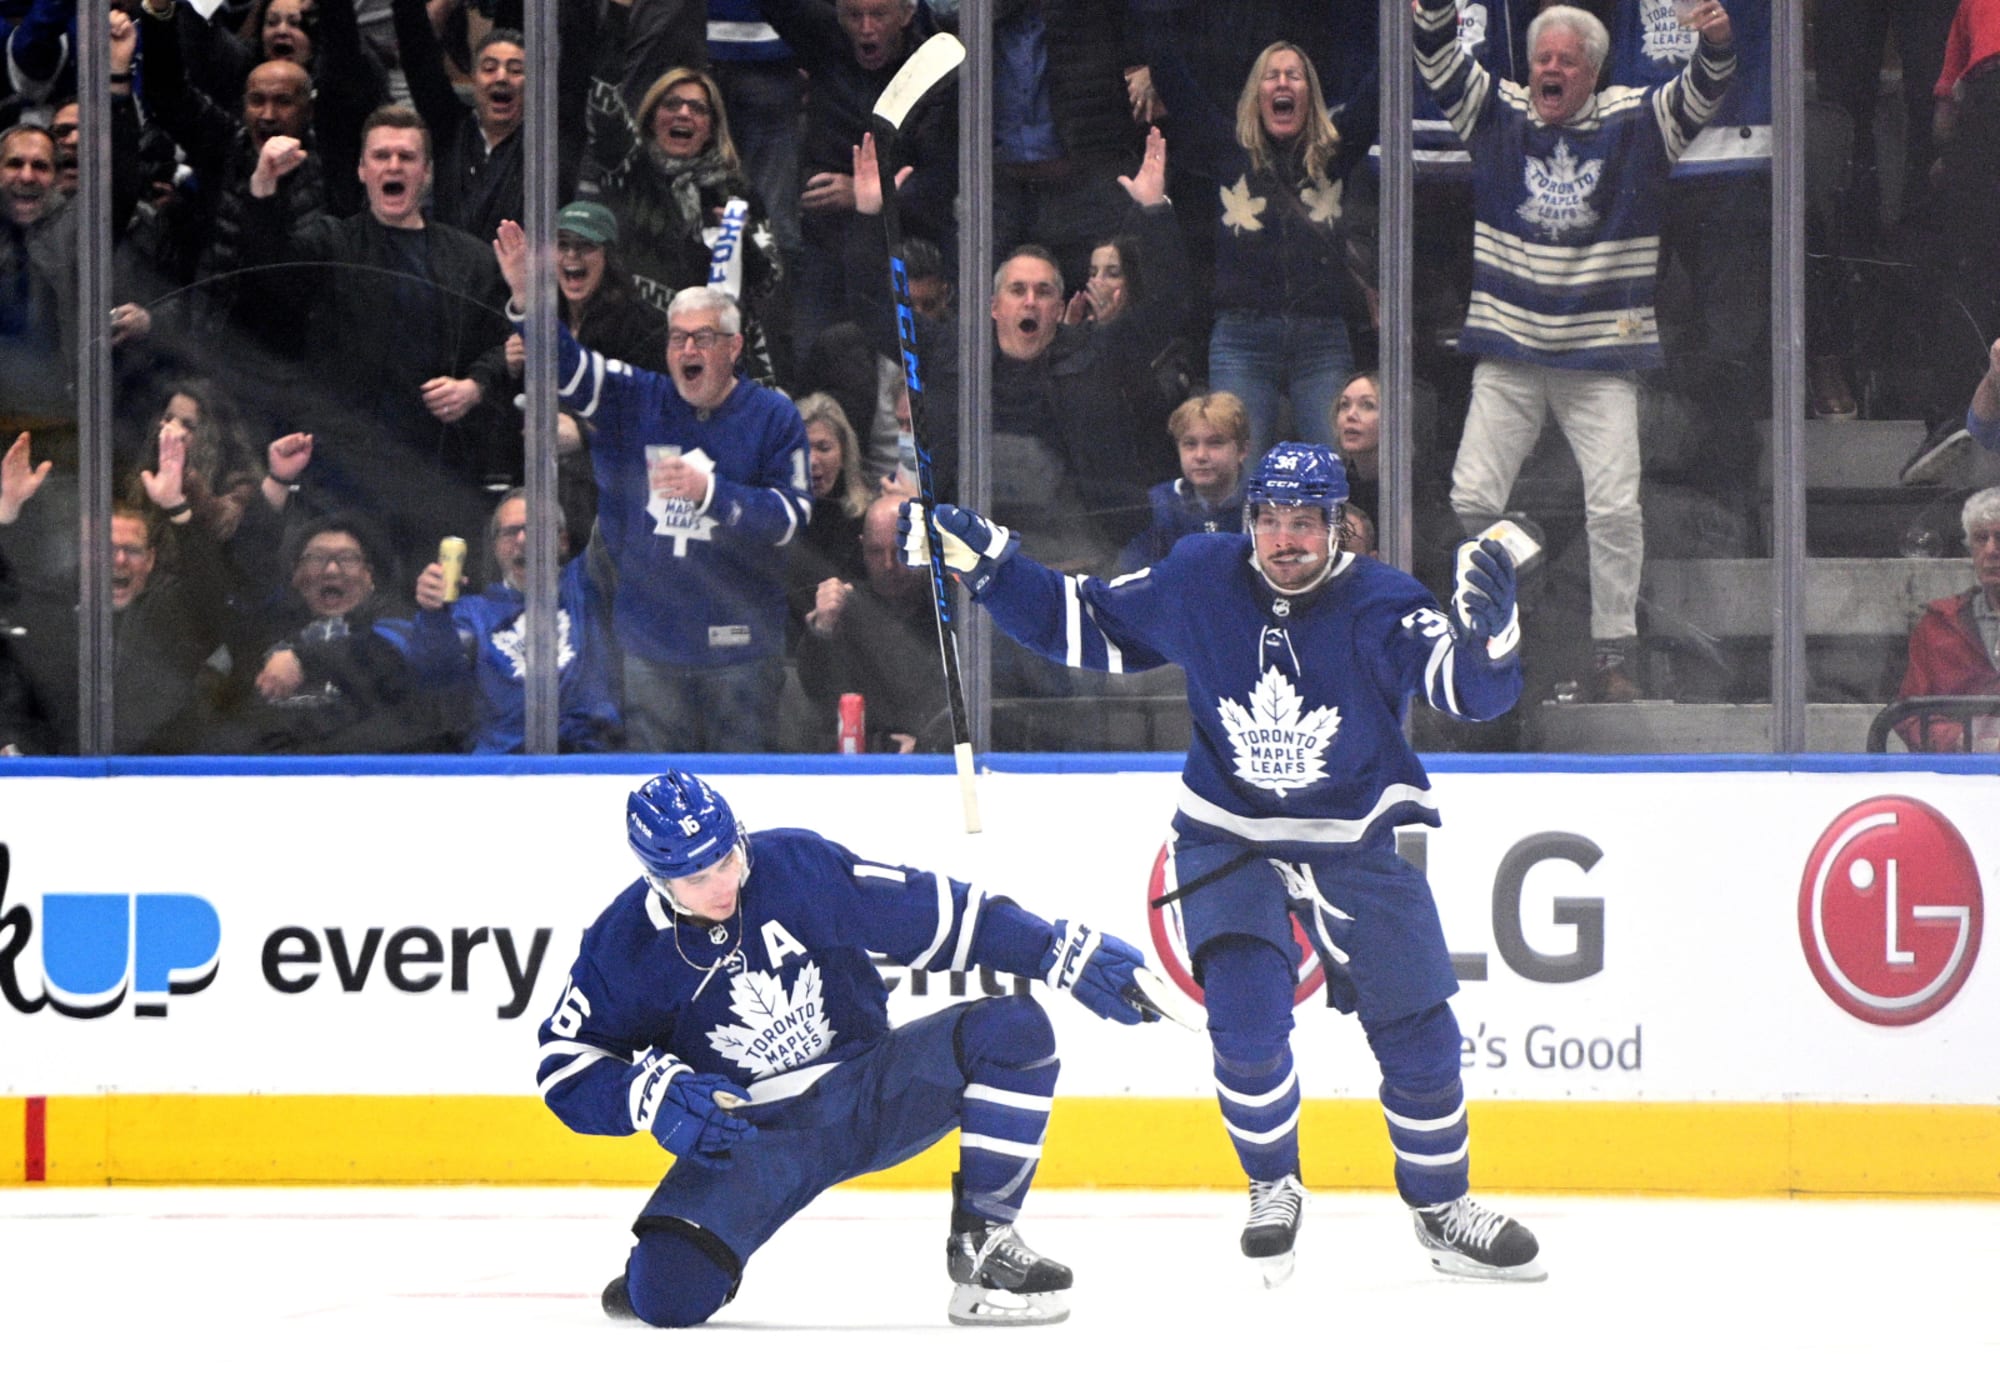 Maple Leafs fans, here's what you're getting on and off the ice